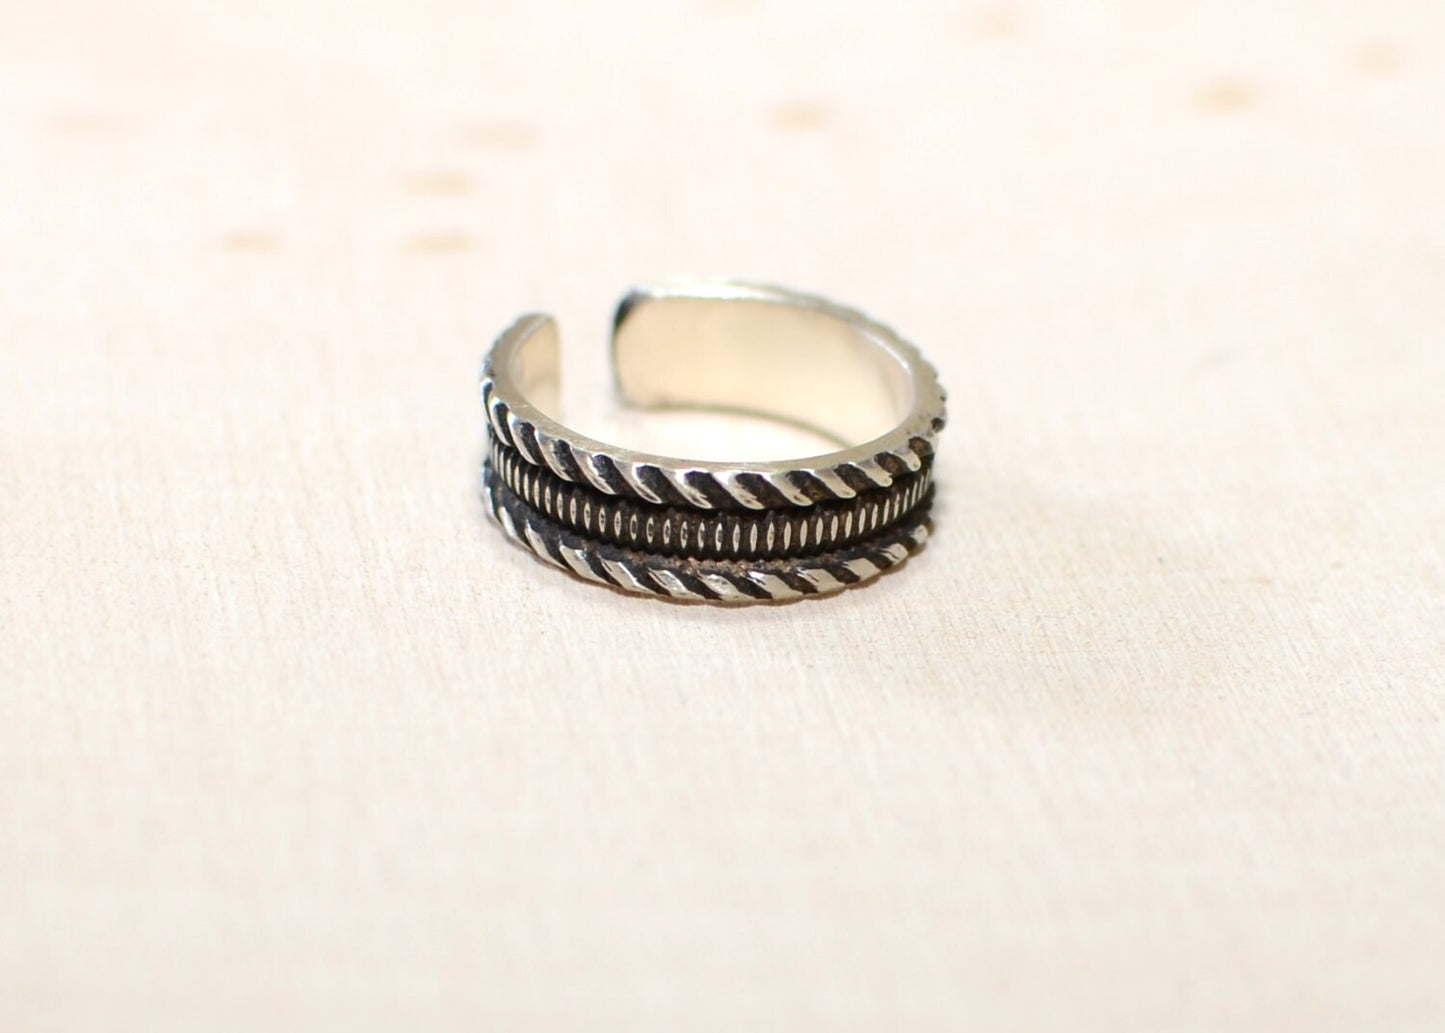 Sterling Silver Toe Ring with Geometrical Pattern and Dark Patina